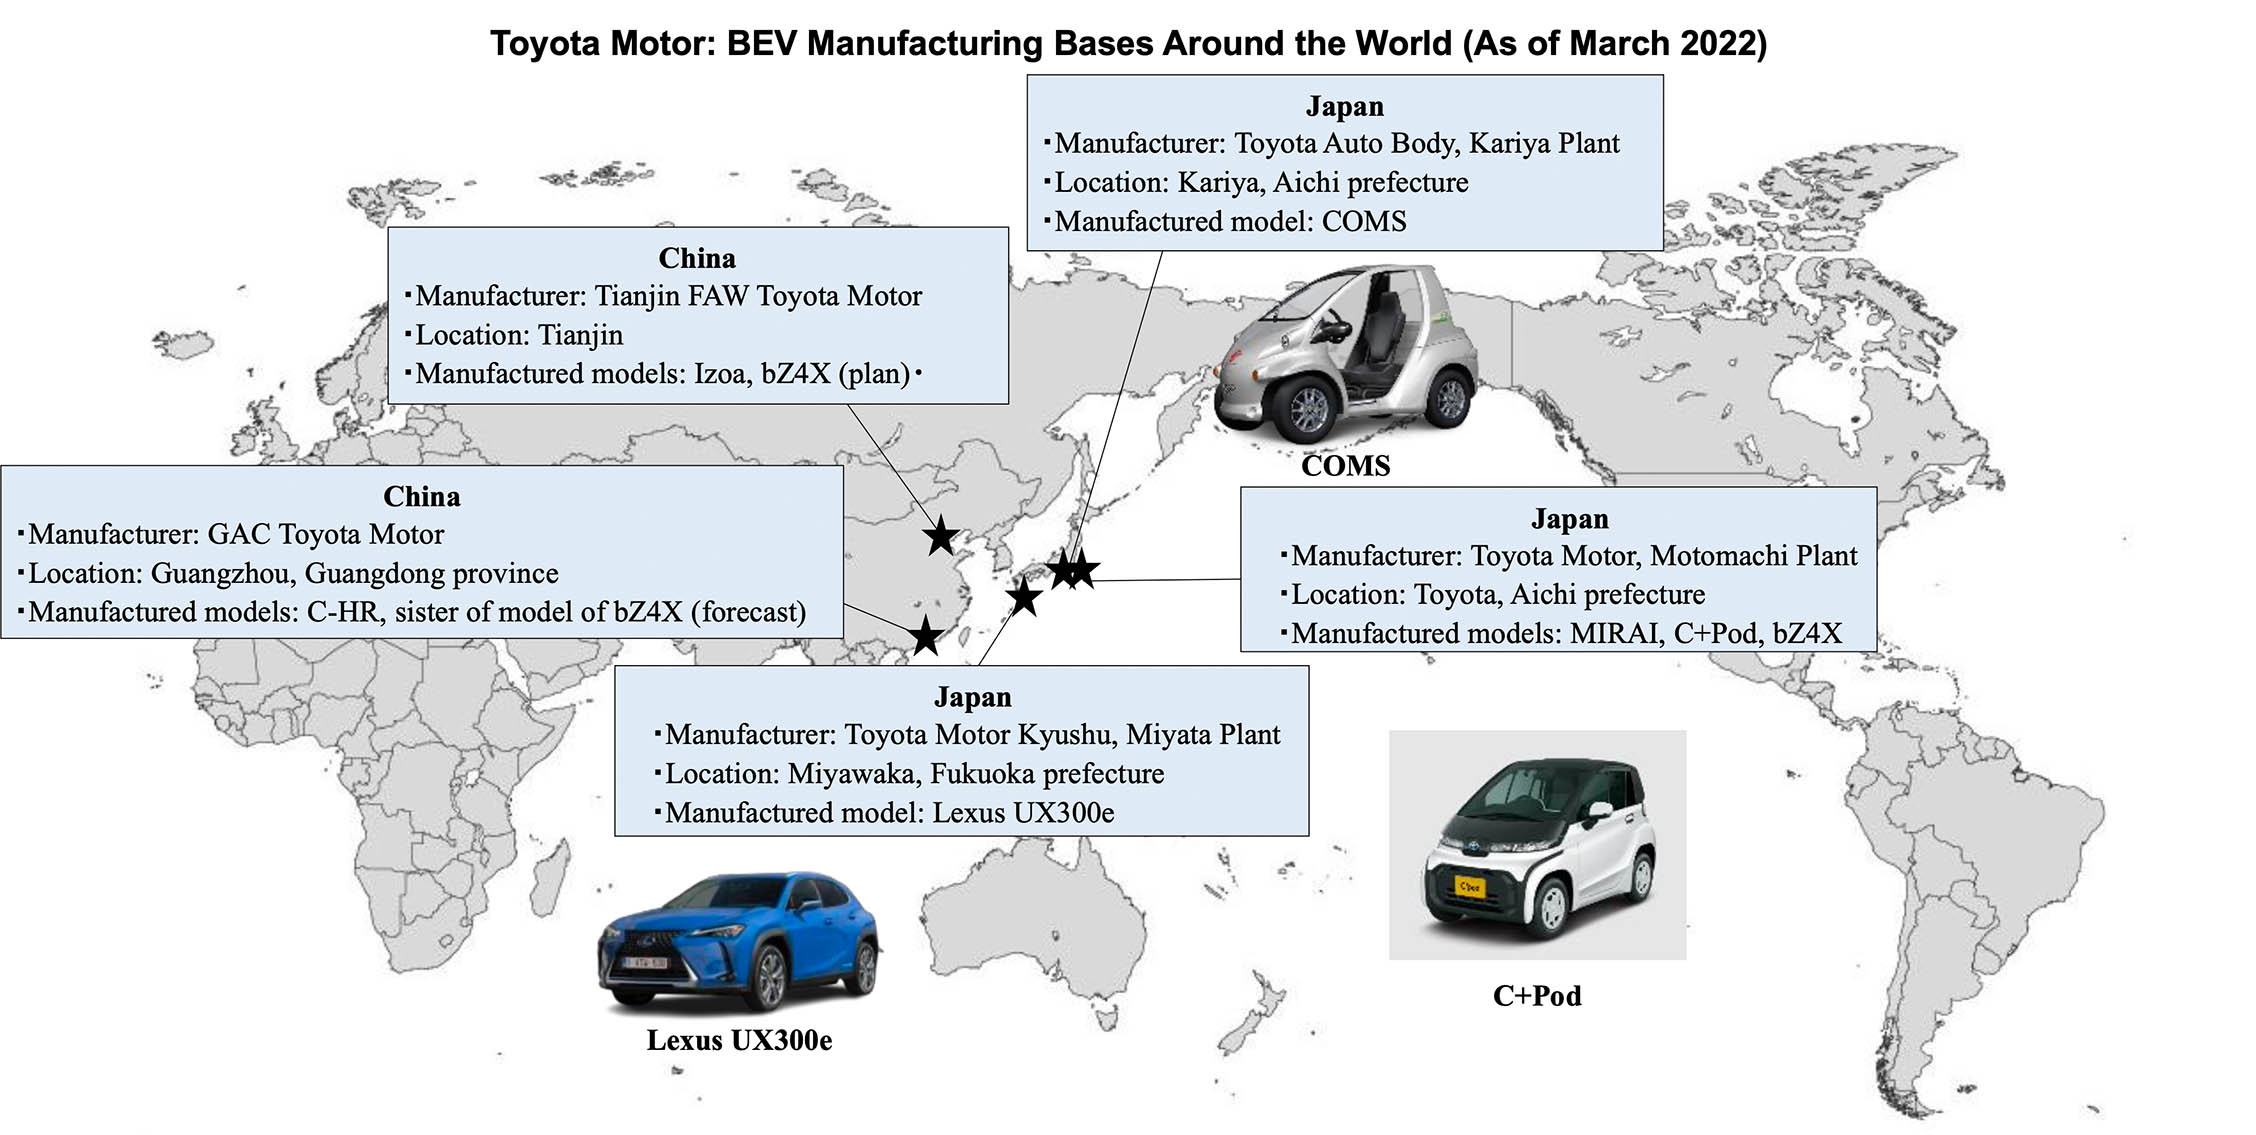 Map infographic: Toyota Motor: BEV Manufacturing Bases Around the World (As of March 2022)